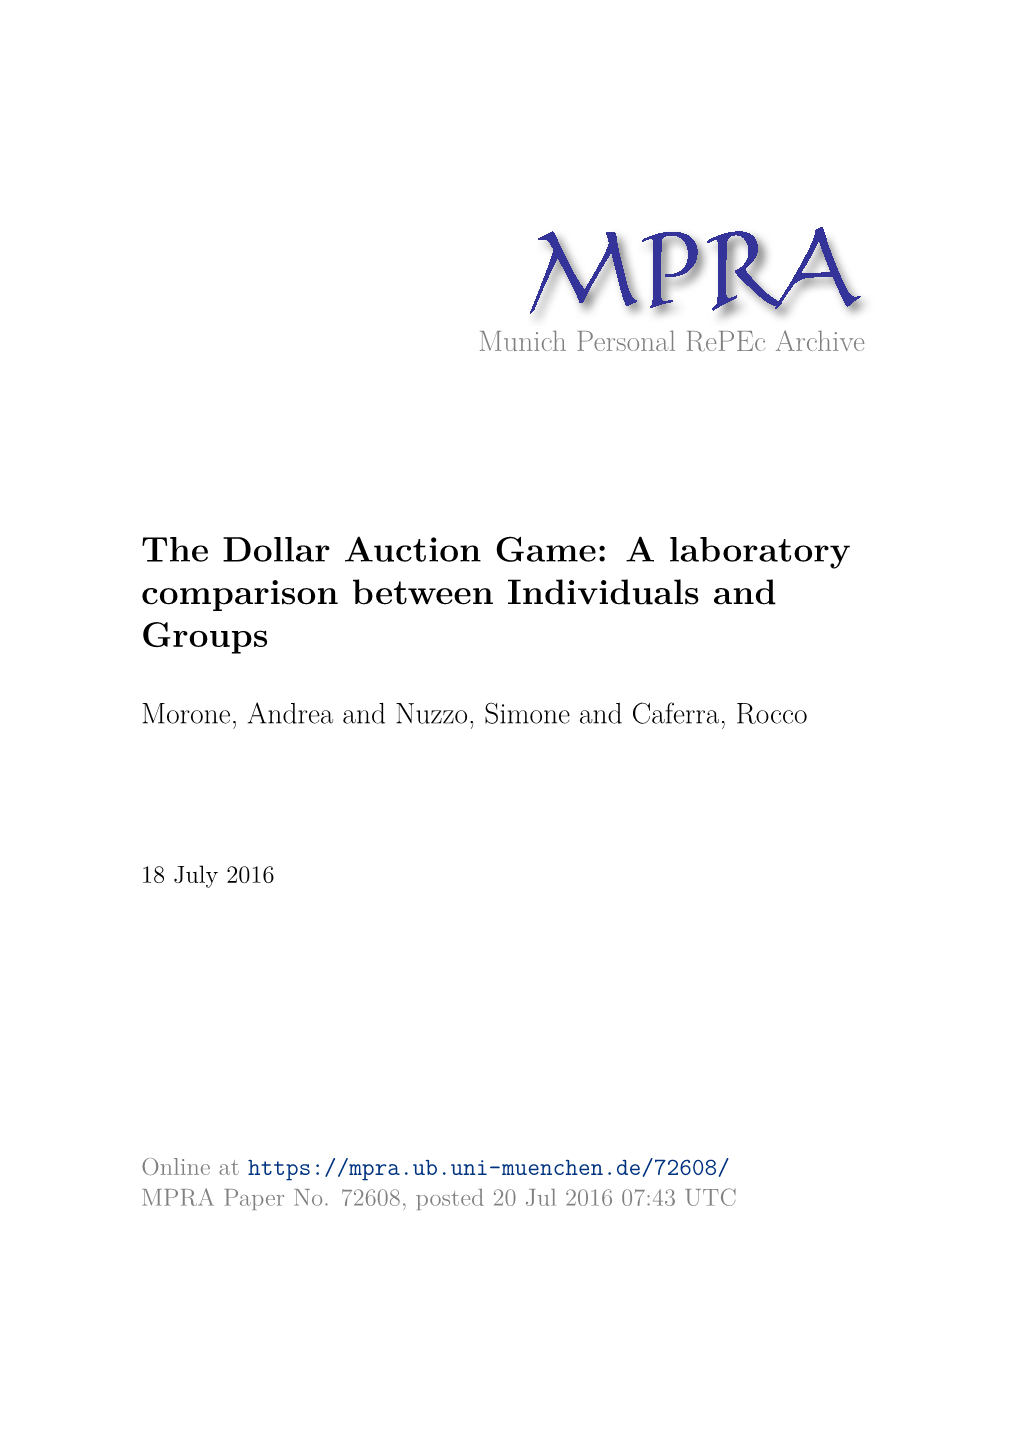 The Dollar Auction Game: a Laboratory Comparison Between Individuals and Groups